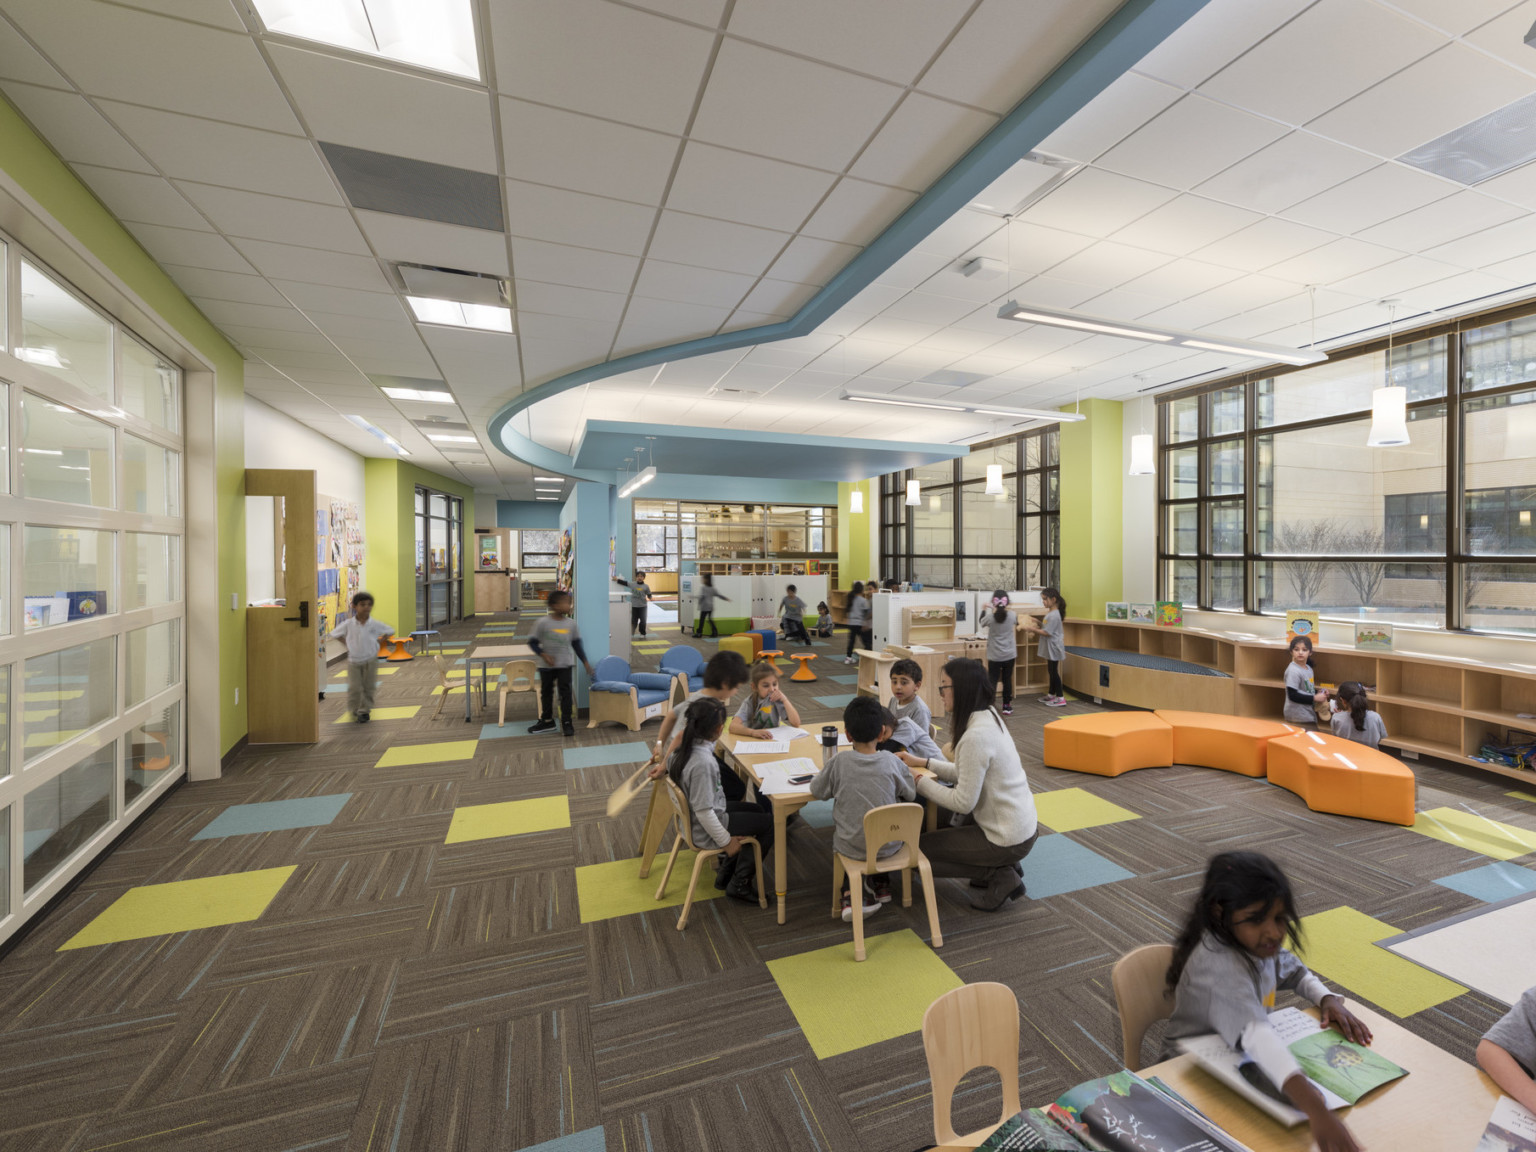 early learning clasroom with colorful carpet, sustainable wood furniture, and color accents on the walls and ceiling to visually identify space